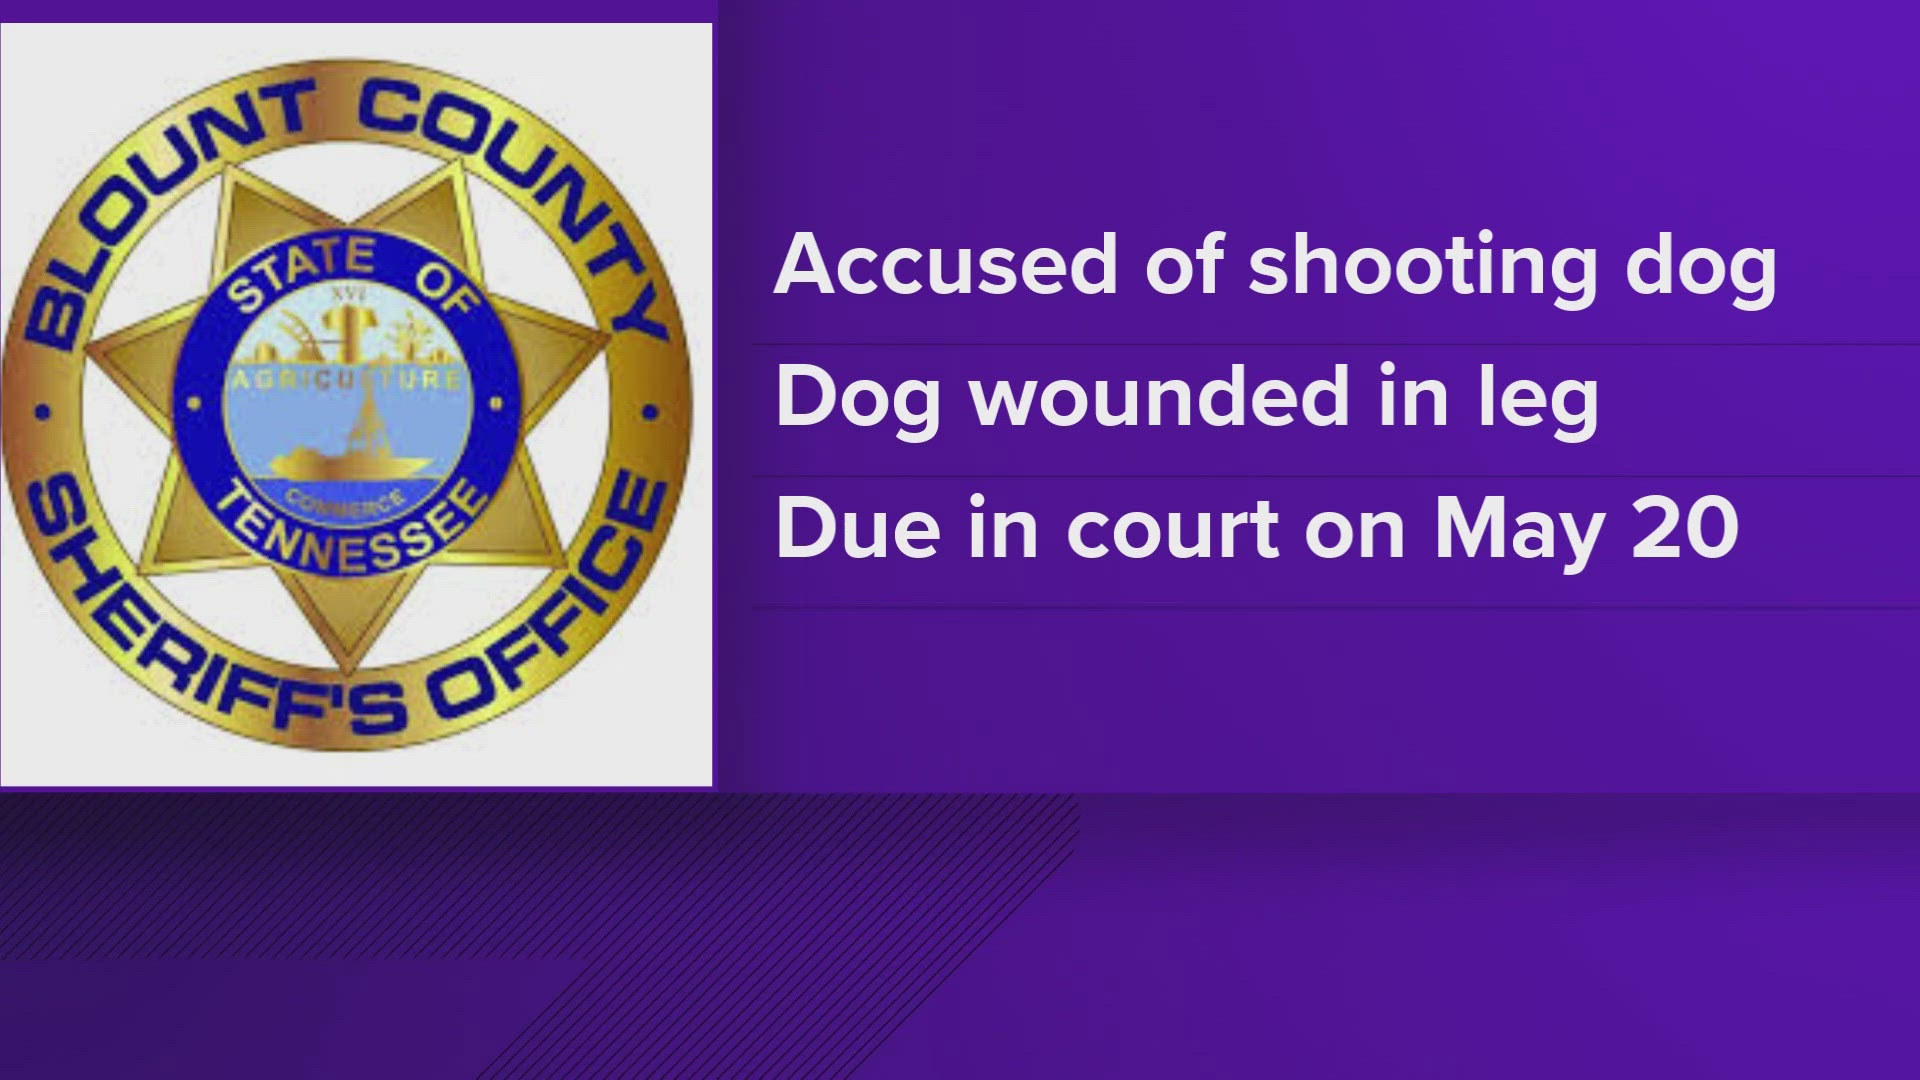 According to court records, Michael Richter is charged with two counts of reckless endangerment with a deadly weapon and one count of aggravated cruelty to animals.